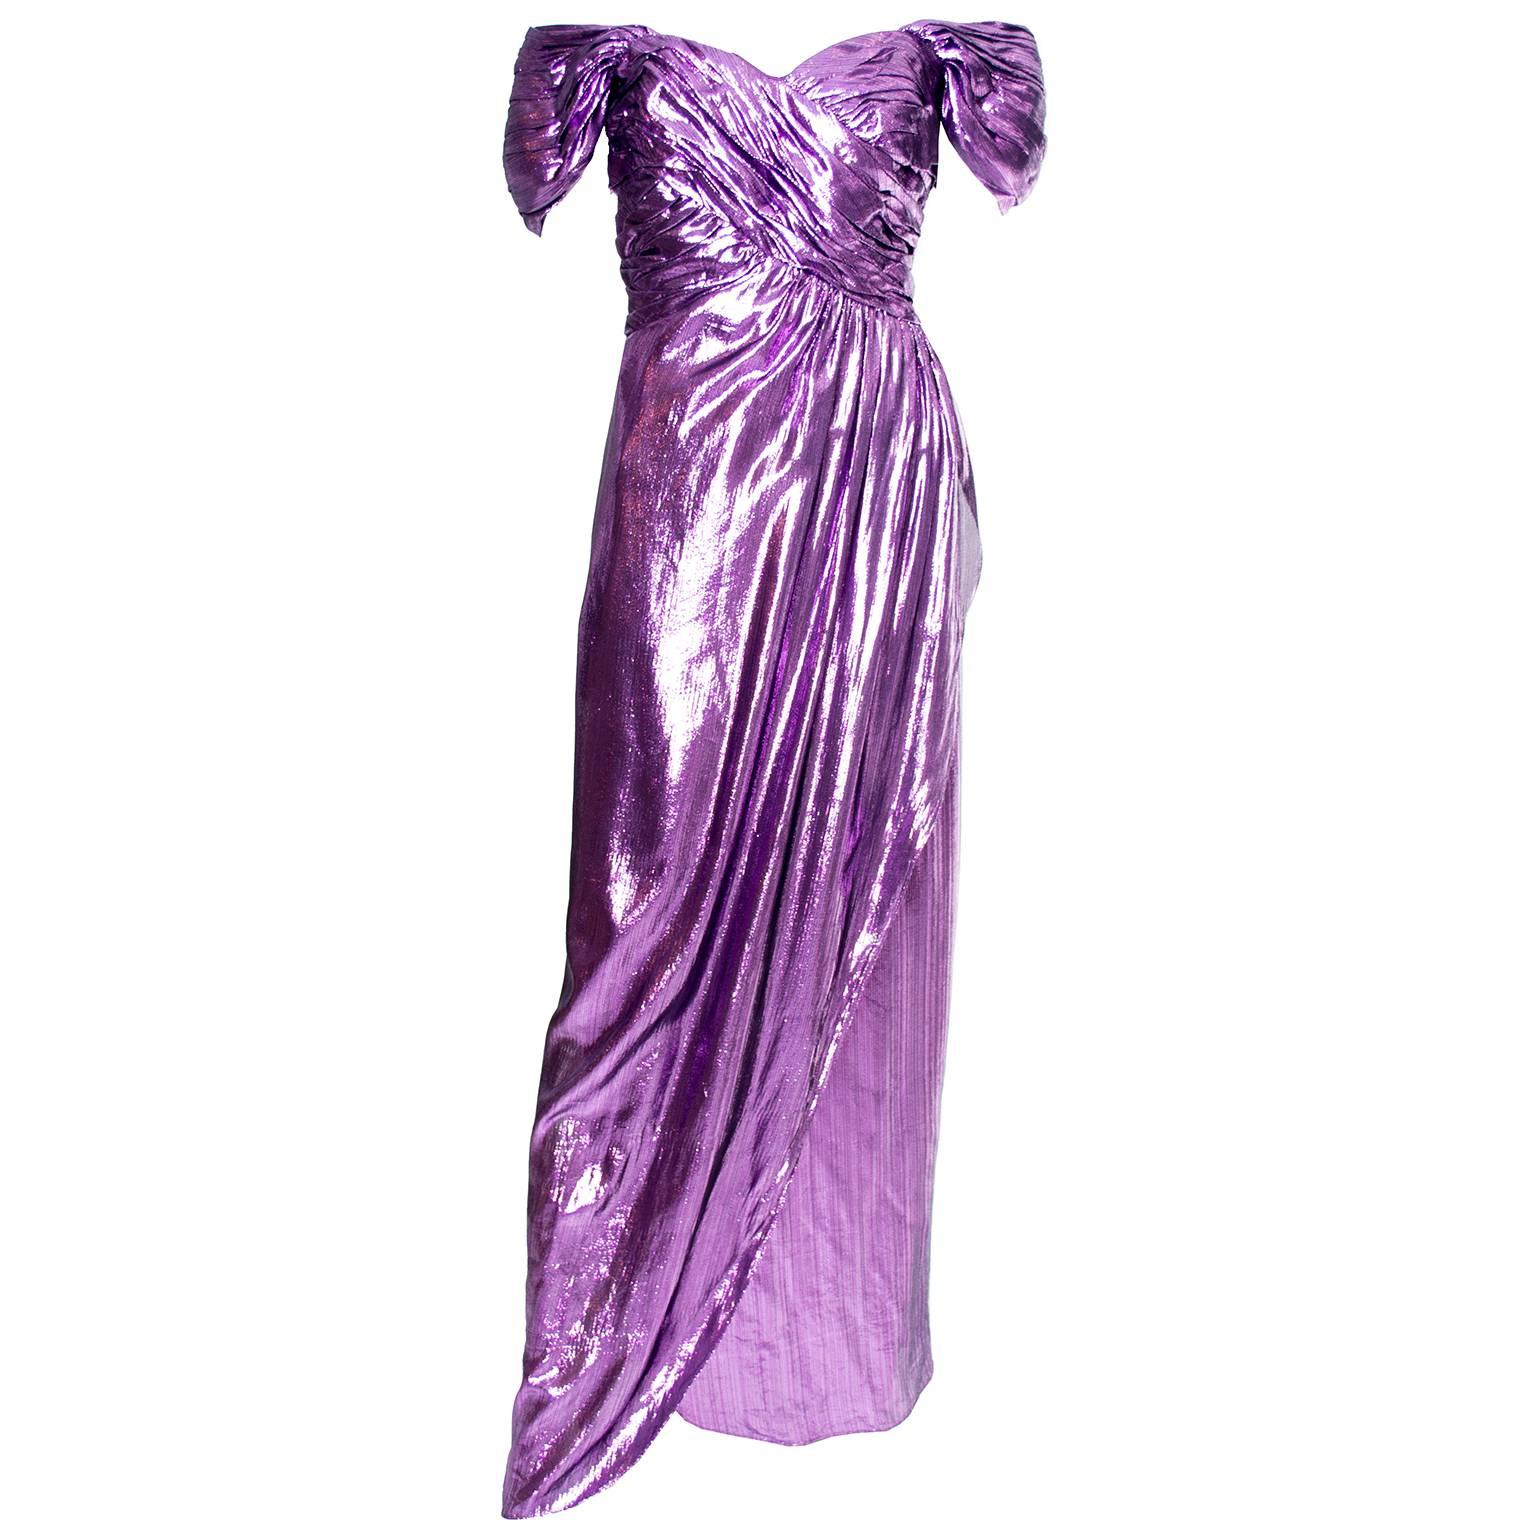 This is one of my favorite Victor Costa dresses! A stunning purple lame vintage evening gown with a beautiful bodice, stays, and sleeves that can be worn either on or off the shoulders.  The dress is in excellent condition, is fully lined, and